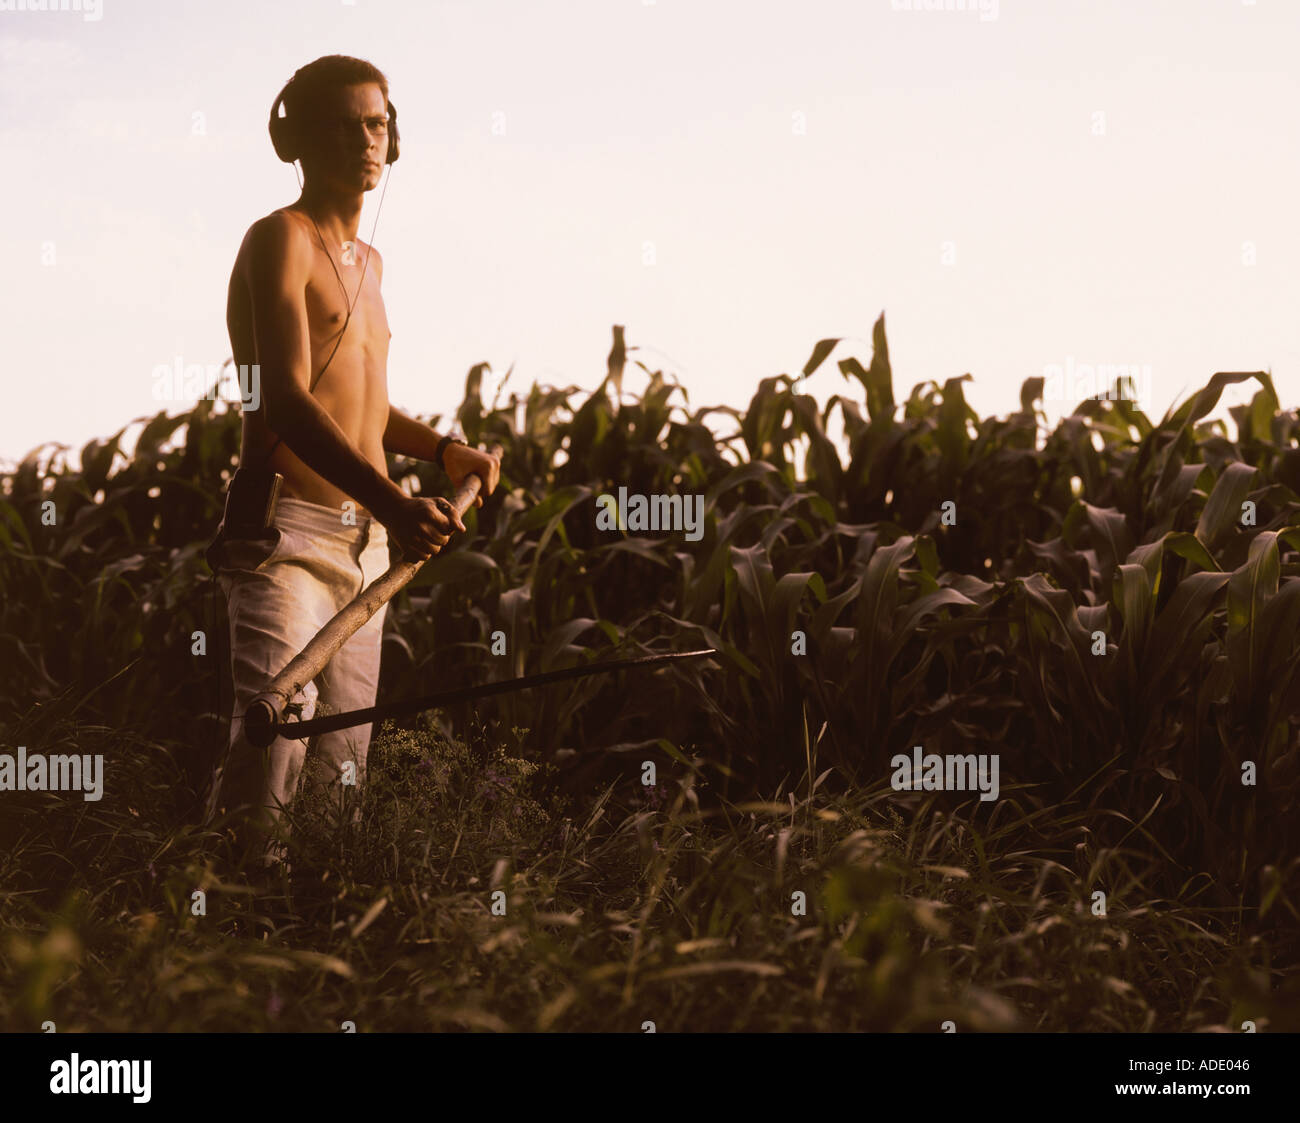 Shirtless young man in headphones mowing grass with scythe Stock Photo -  Alamy